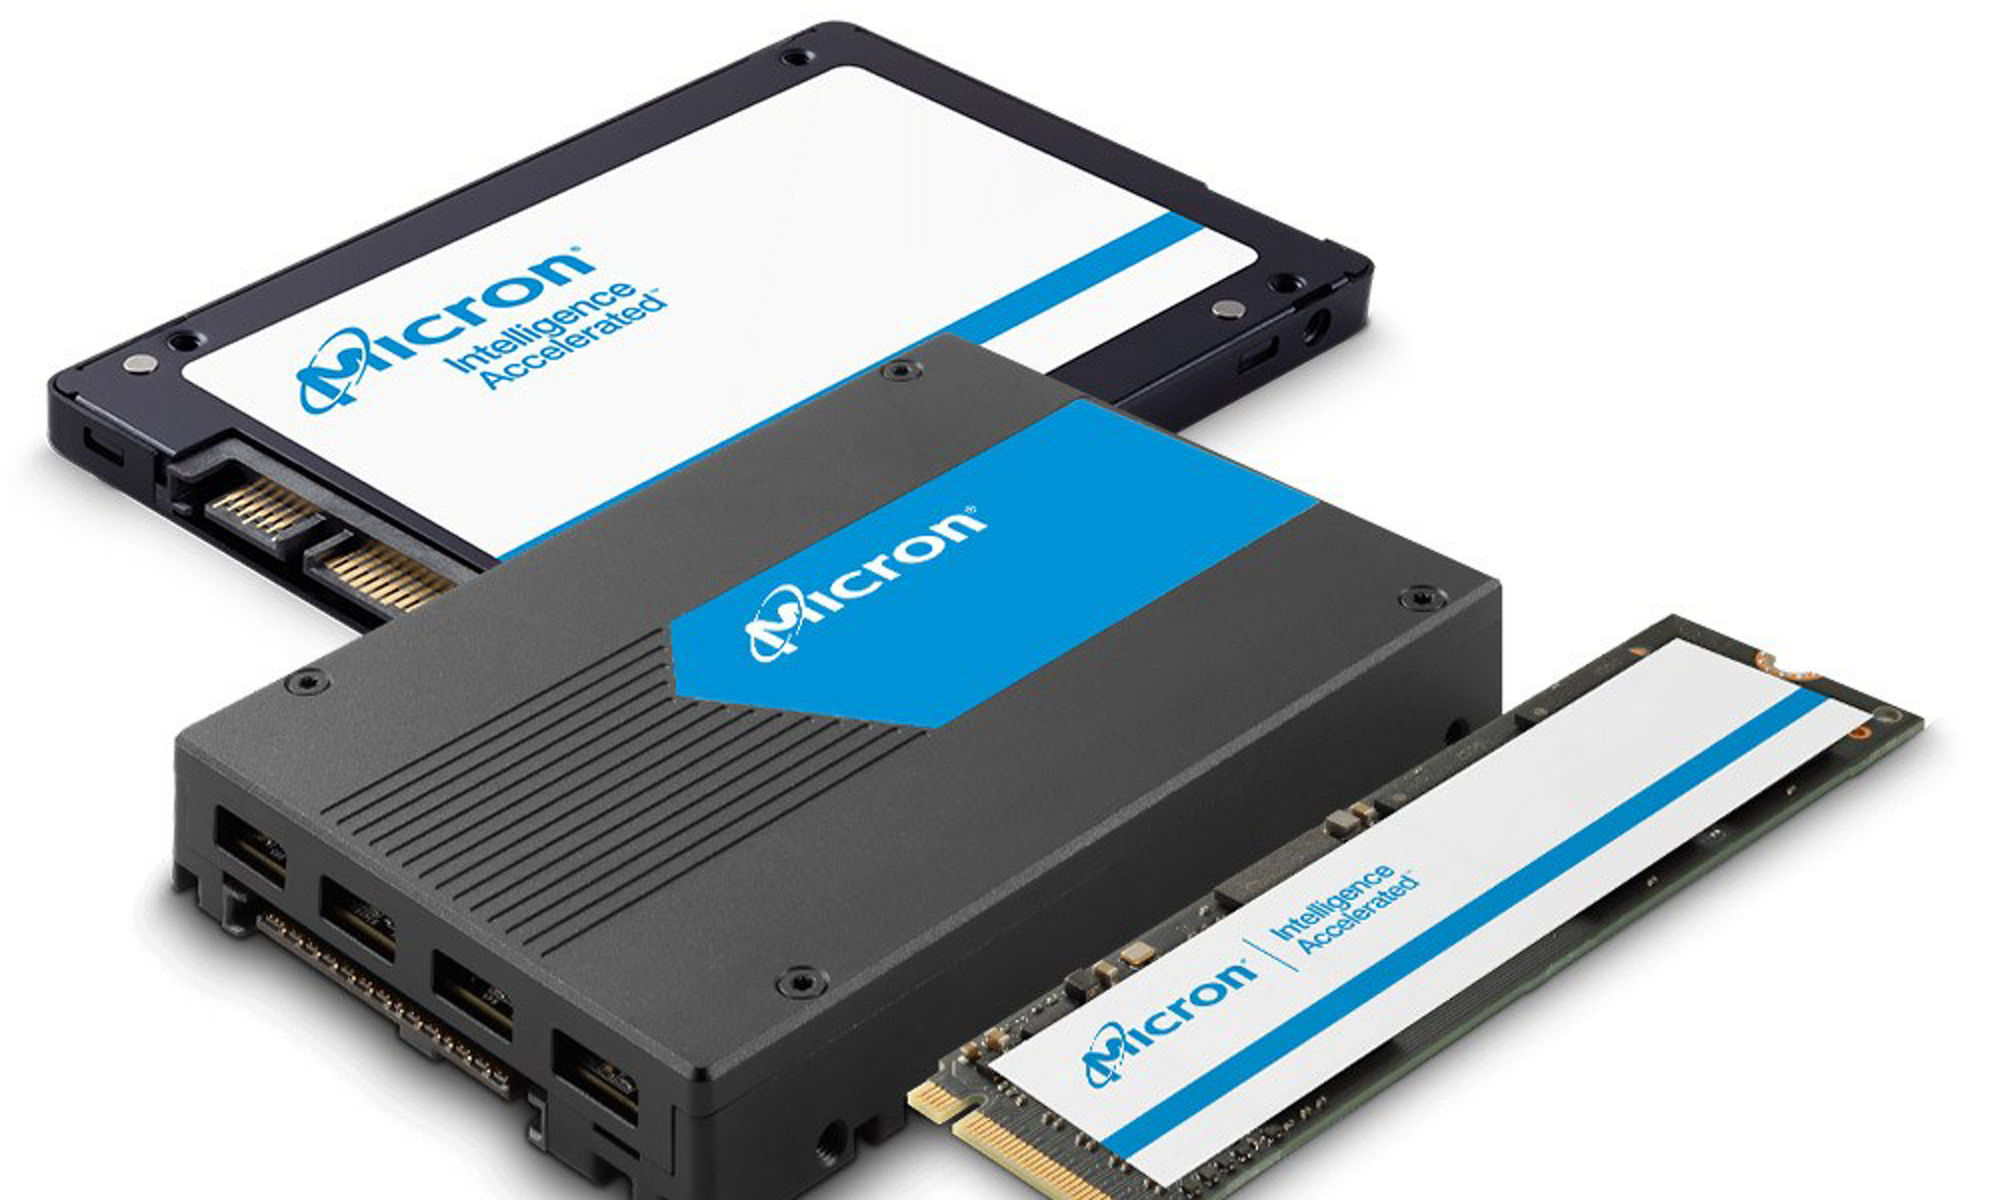 Multiple Micron SSD products